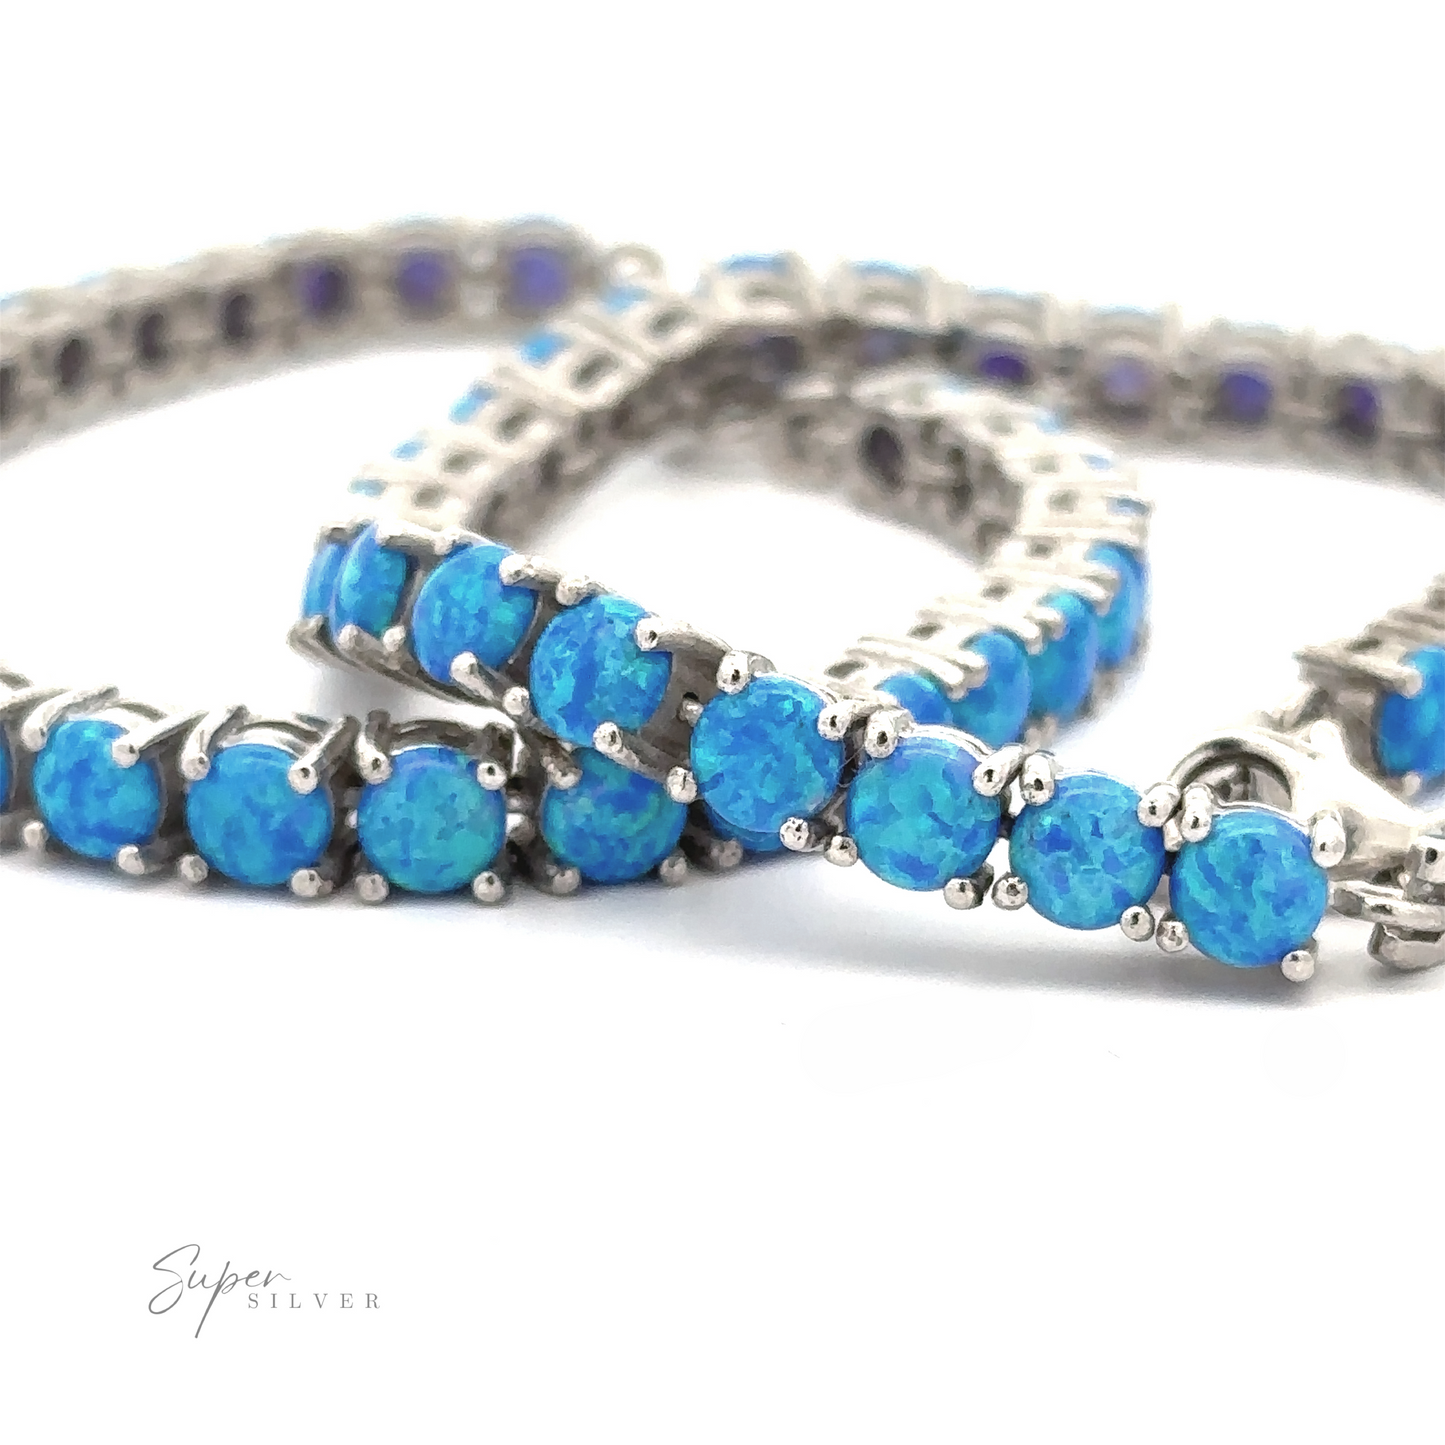 Brilliant Blue Opal Bracelet adorned with bright blue lab-created opal stones, closely interconnected, arranged on a white surface, showing detailed craftwork.